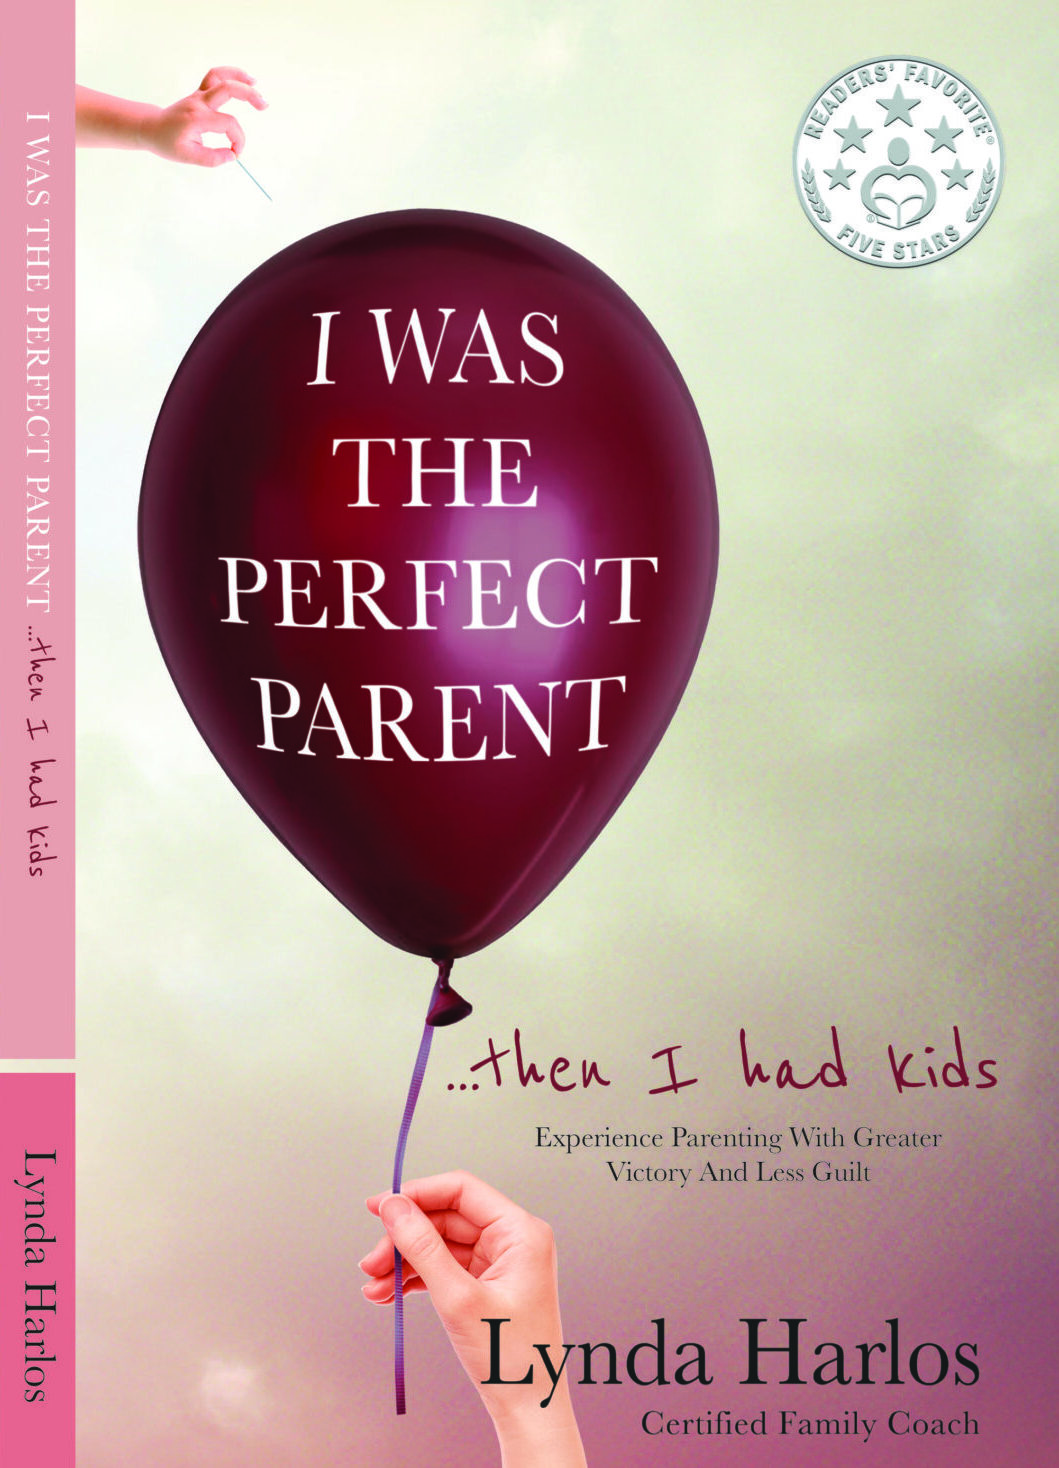 I was the Perfect Parent...then I had kids book cover